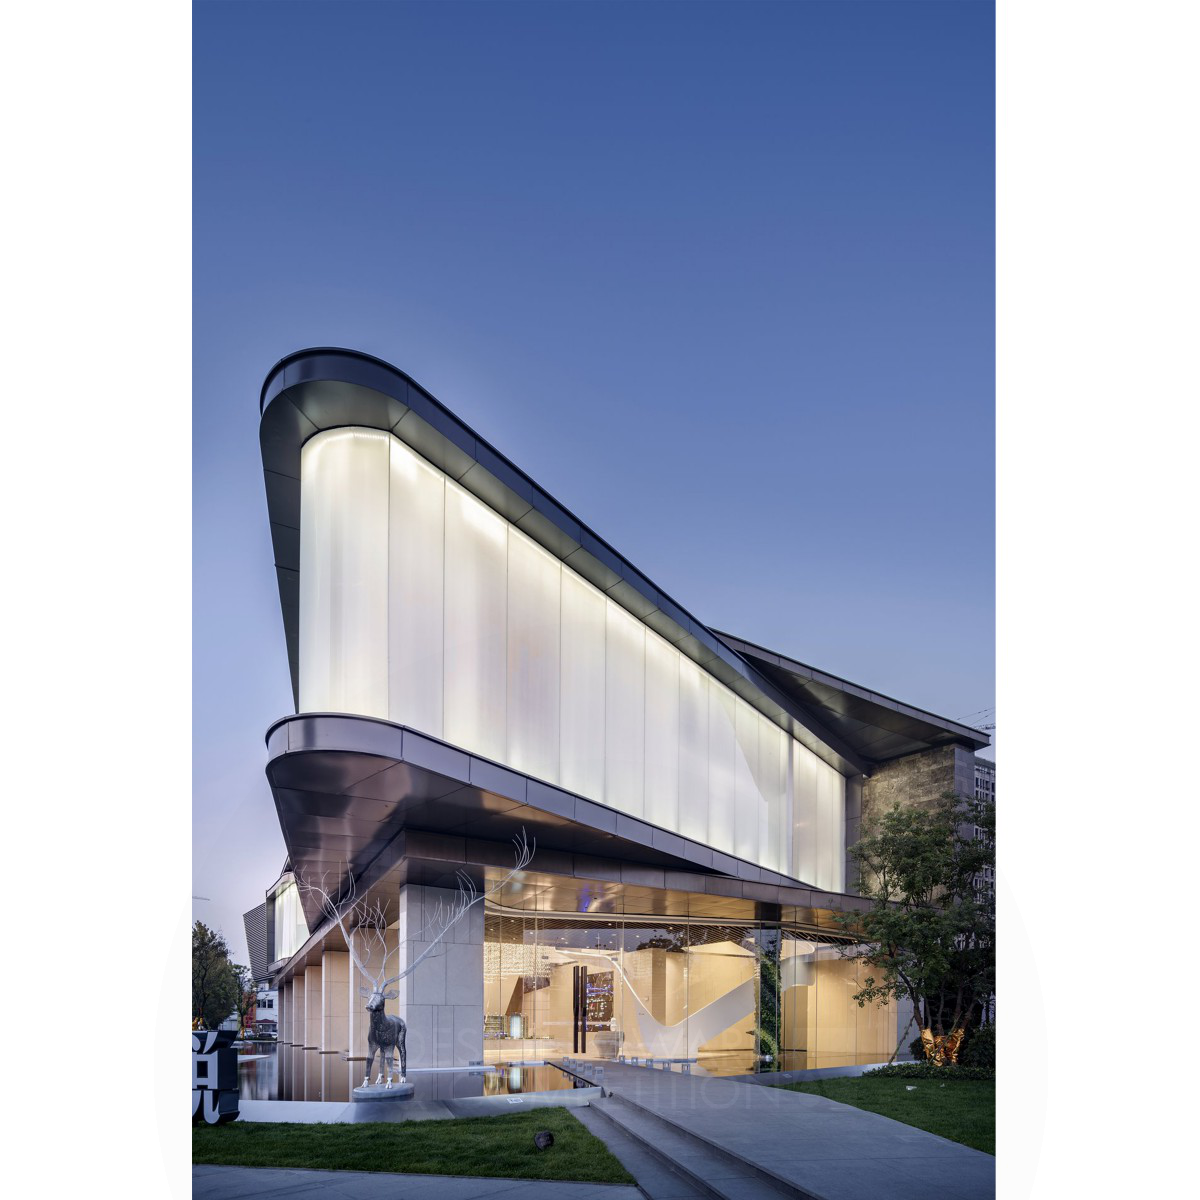 Waving Ribbon Sales Center by Kris Lin and Jiayu Yang Golden Architecture, Building and Structure Design Award Winner 2018 